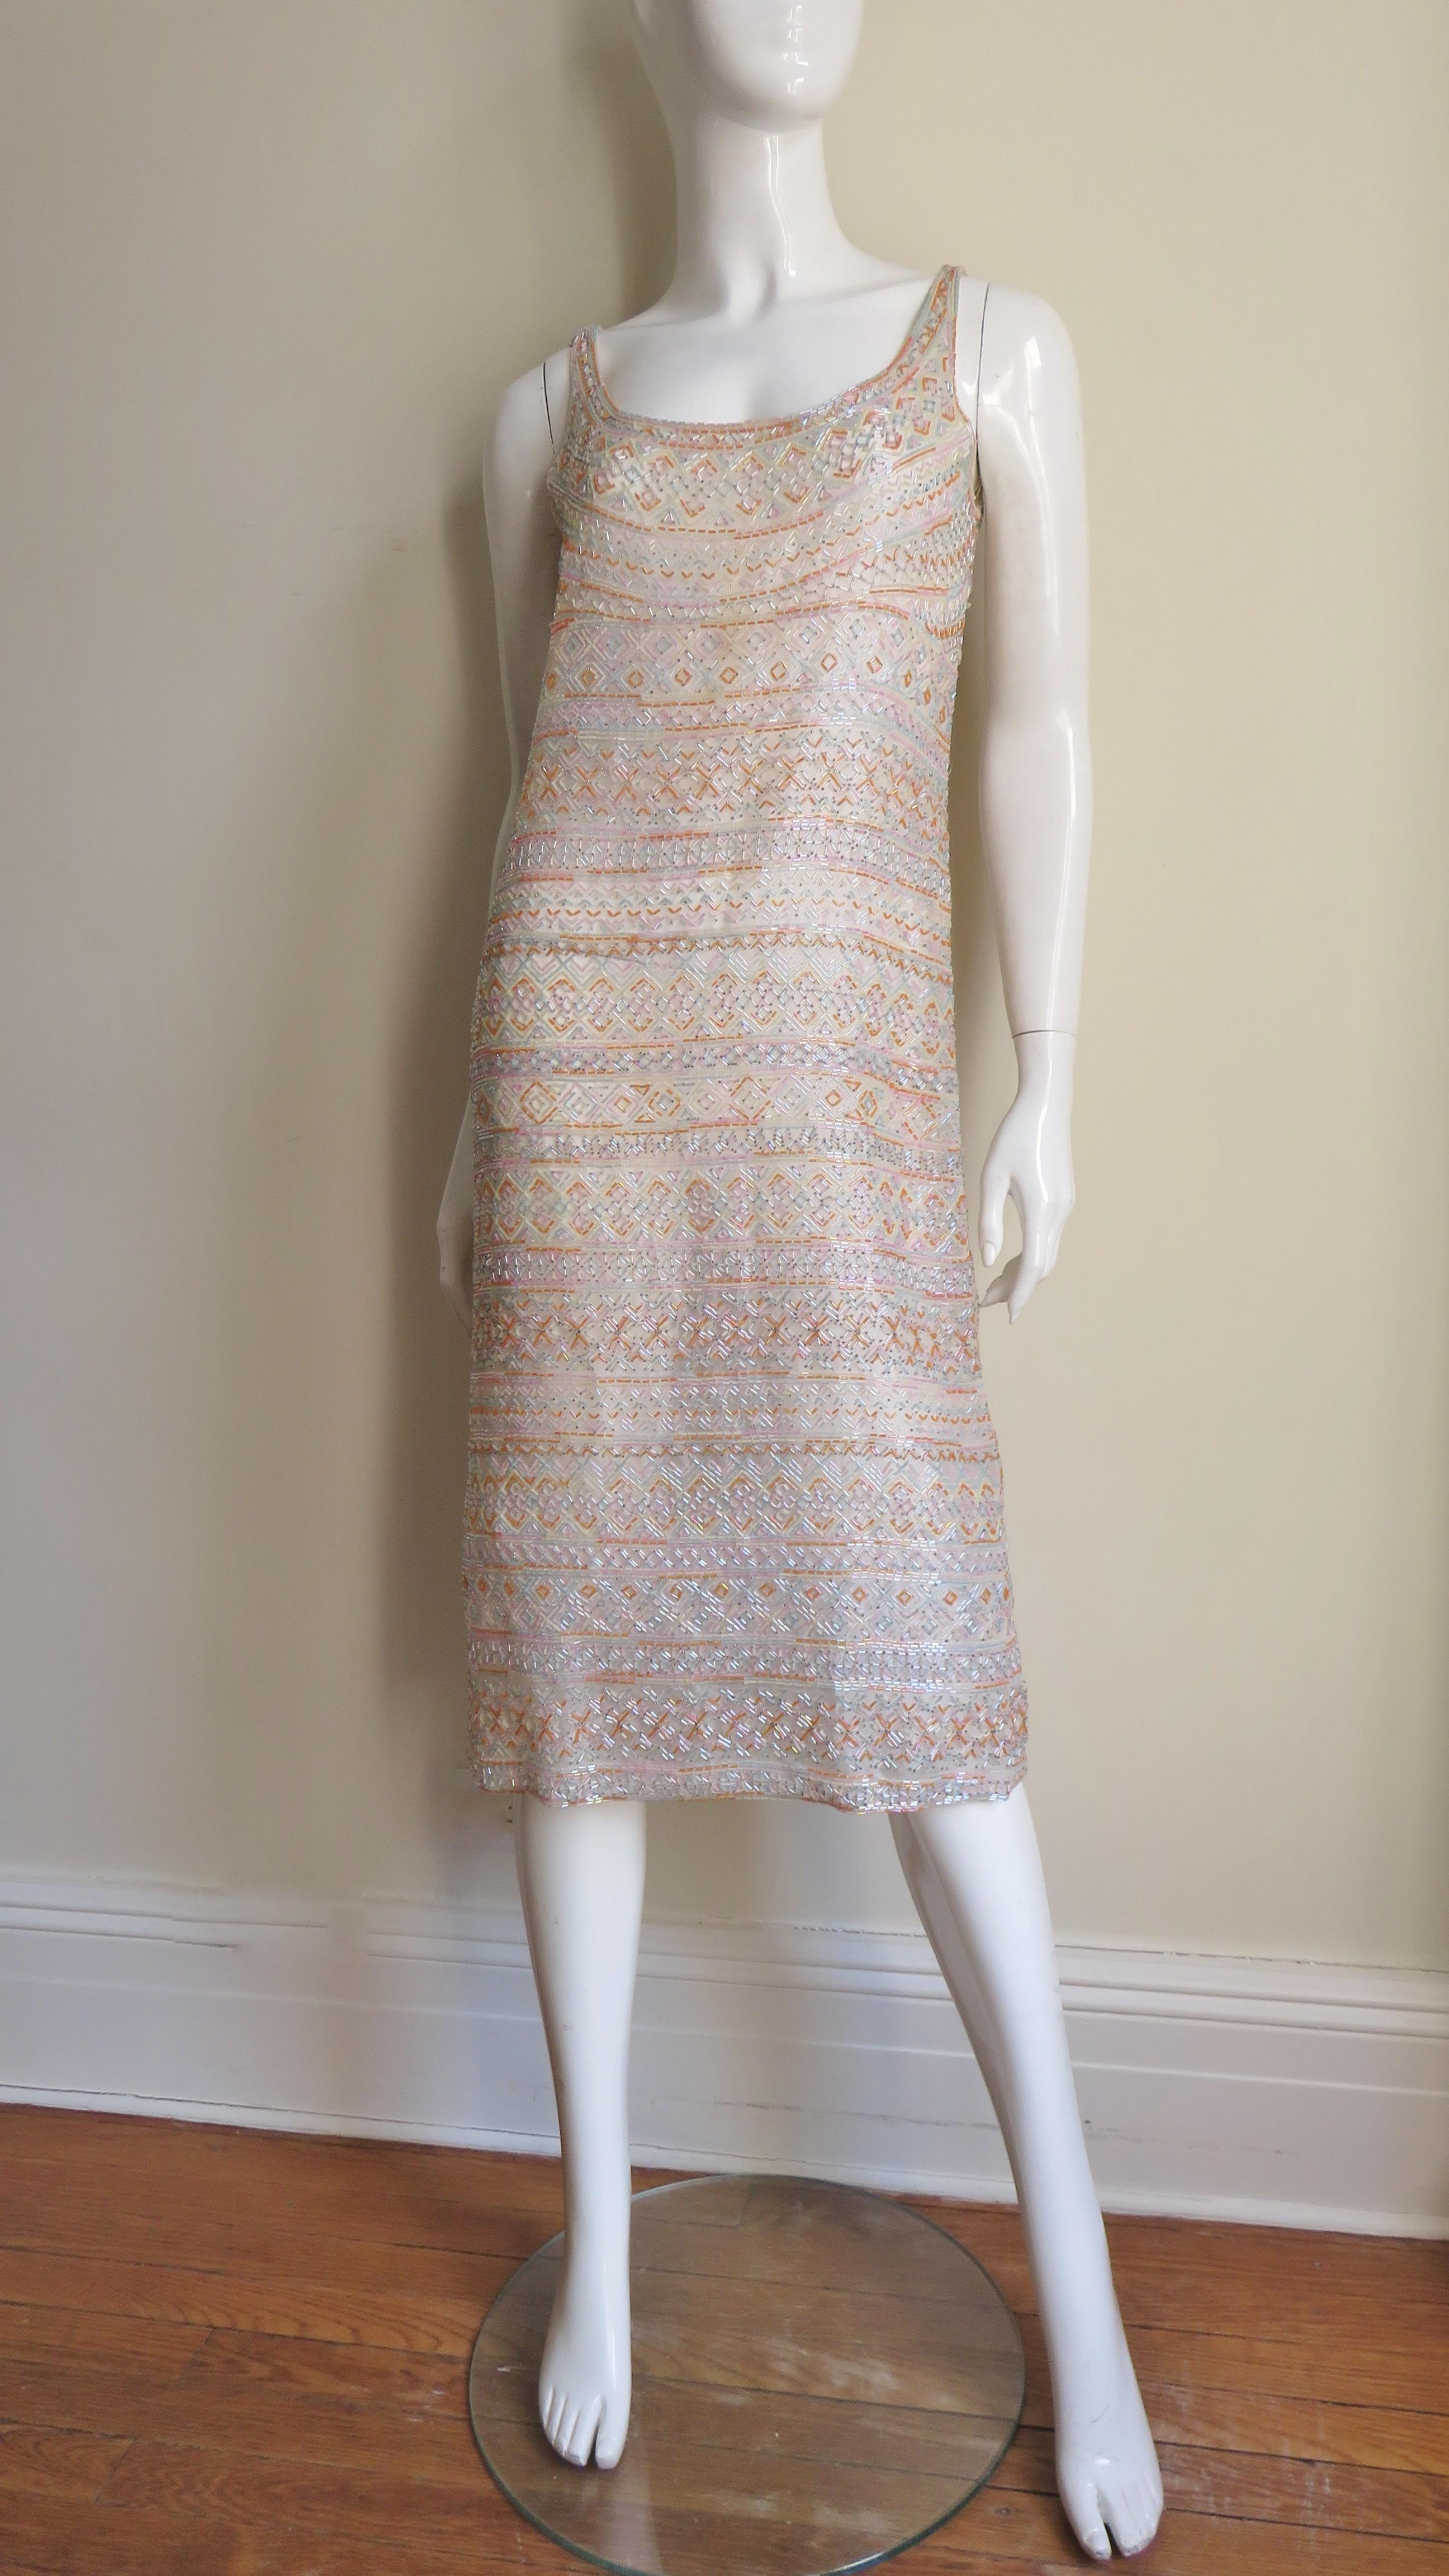  Halston 1970s Documented Beaded Dress  For Sale 2